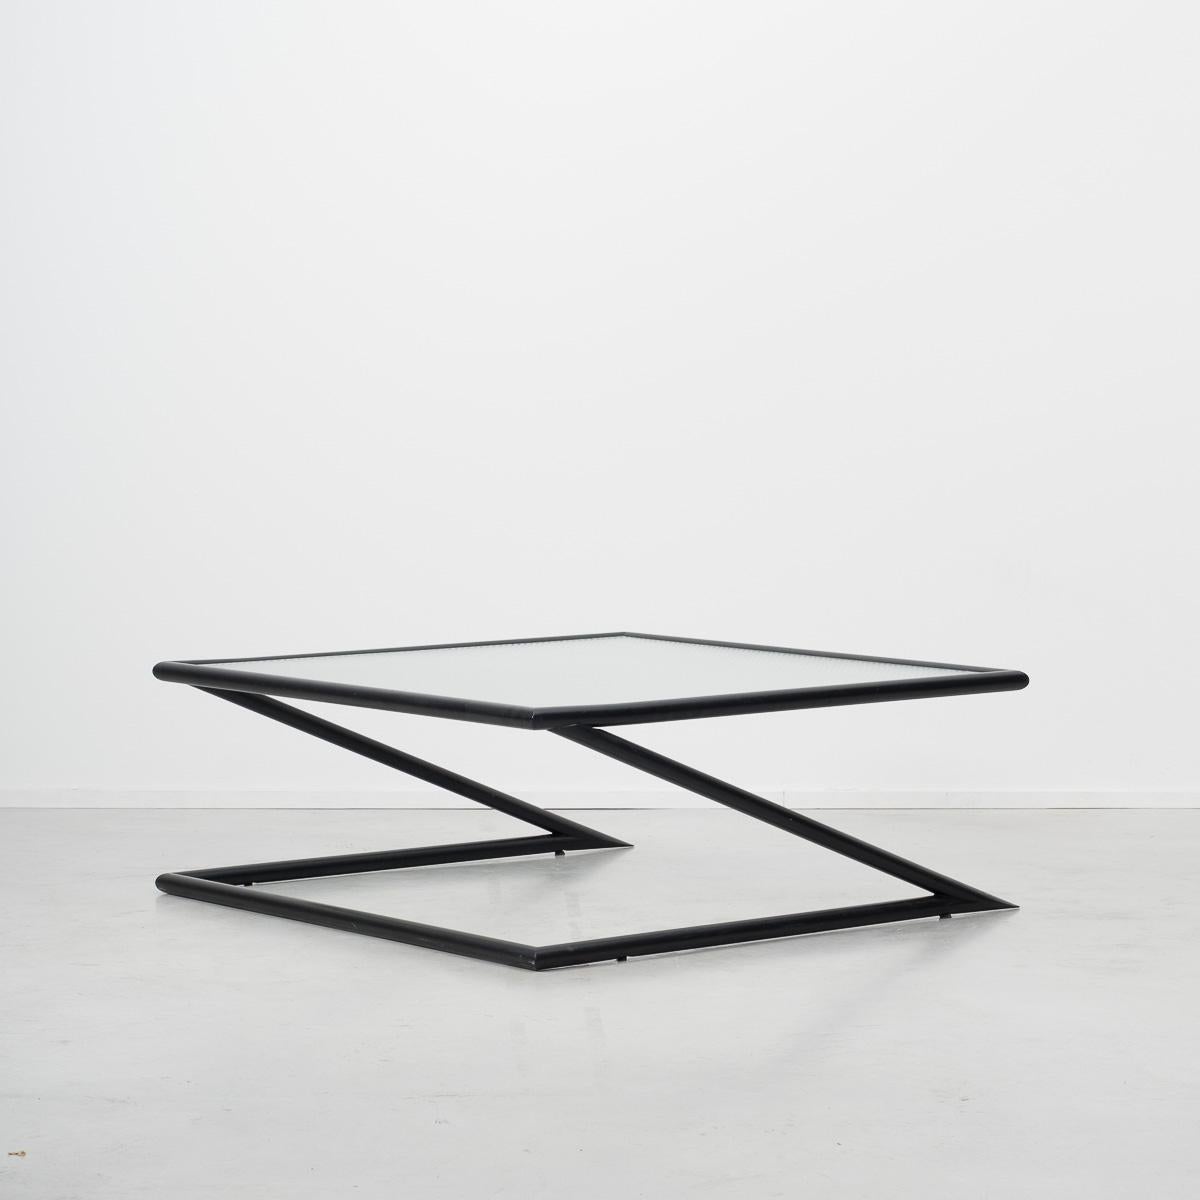 Late 20th Century Harvink Sculptural Z-Tables